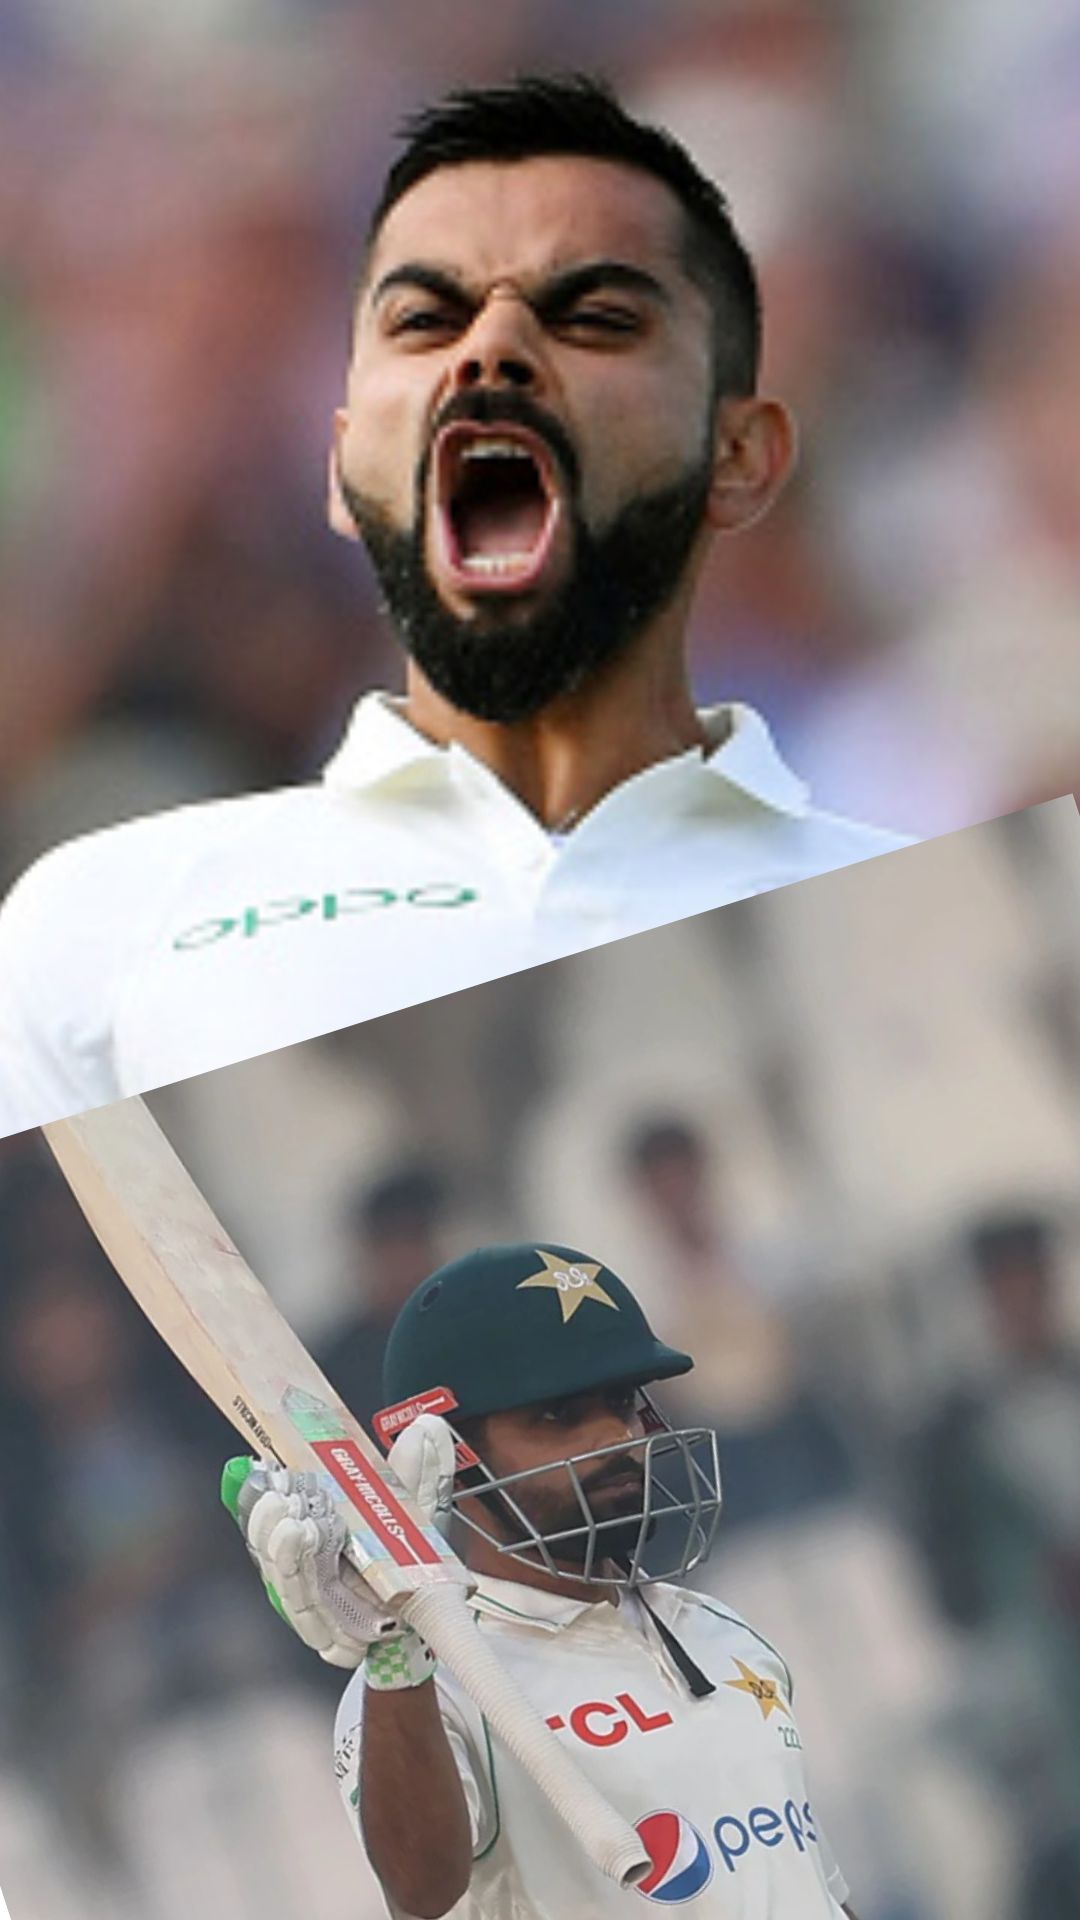 Virat Kohli vs Babar Azam in Australian conditions in Tests; Find out who wins